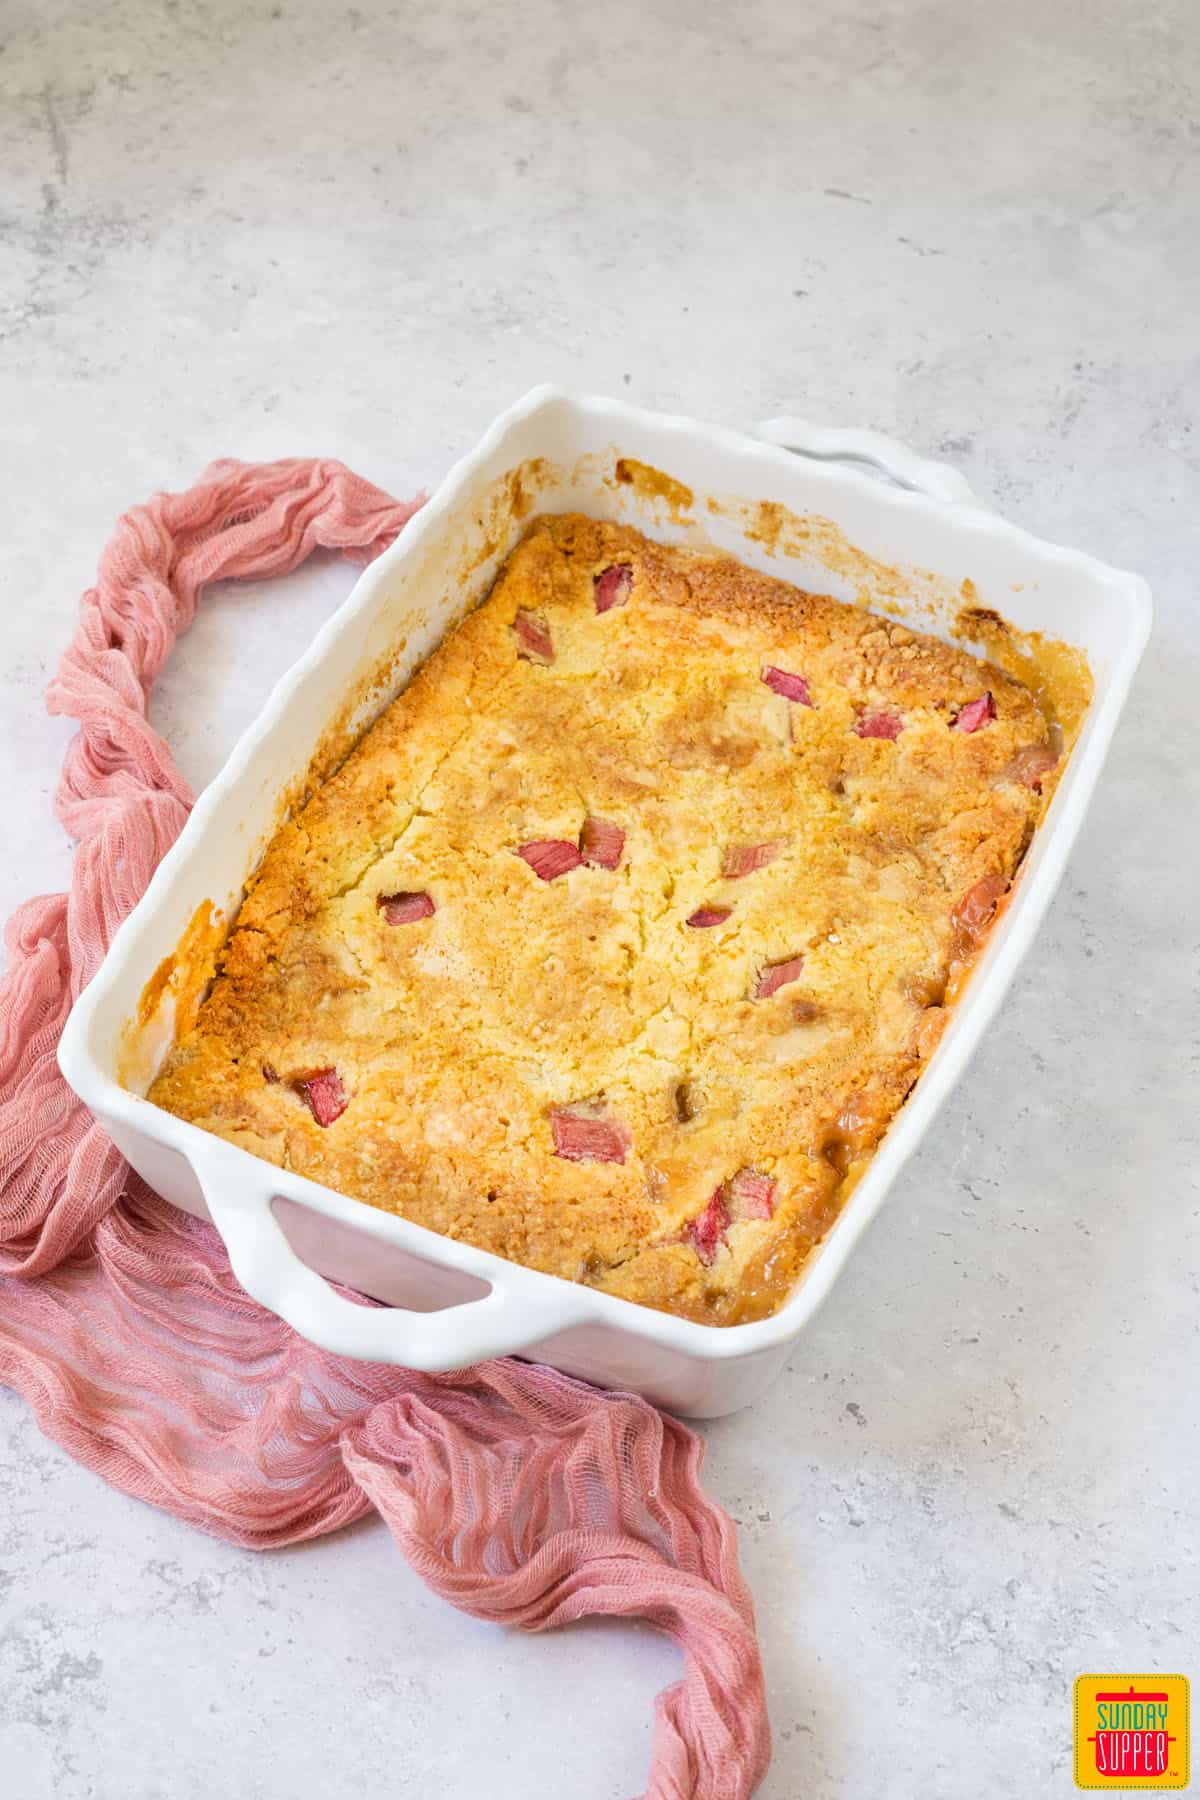 rhubarb dump cake in a white baking dish on the table